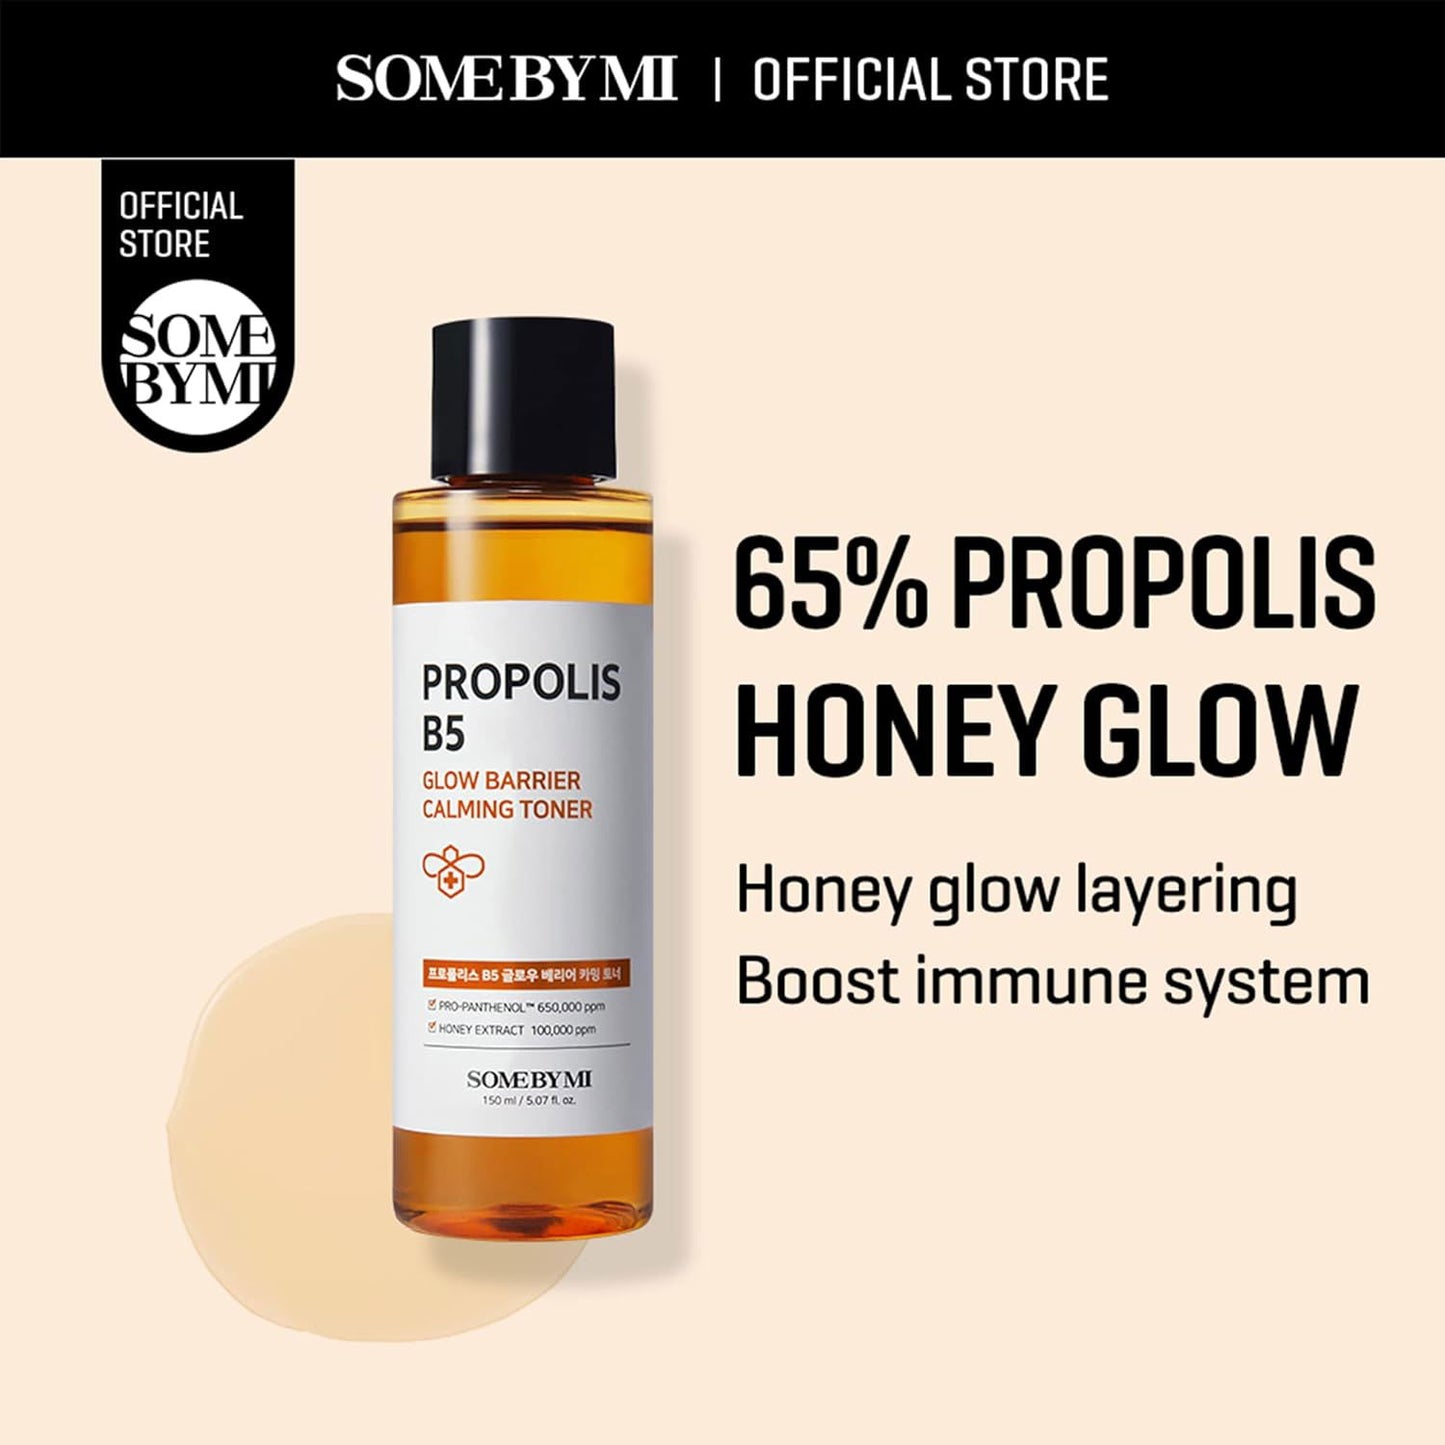 SOME BY MI Propolis B5 Glow Barrier Calming Toner - Miessential